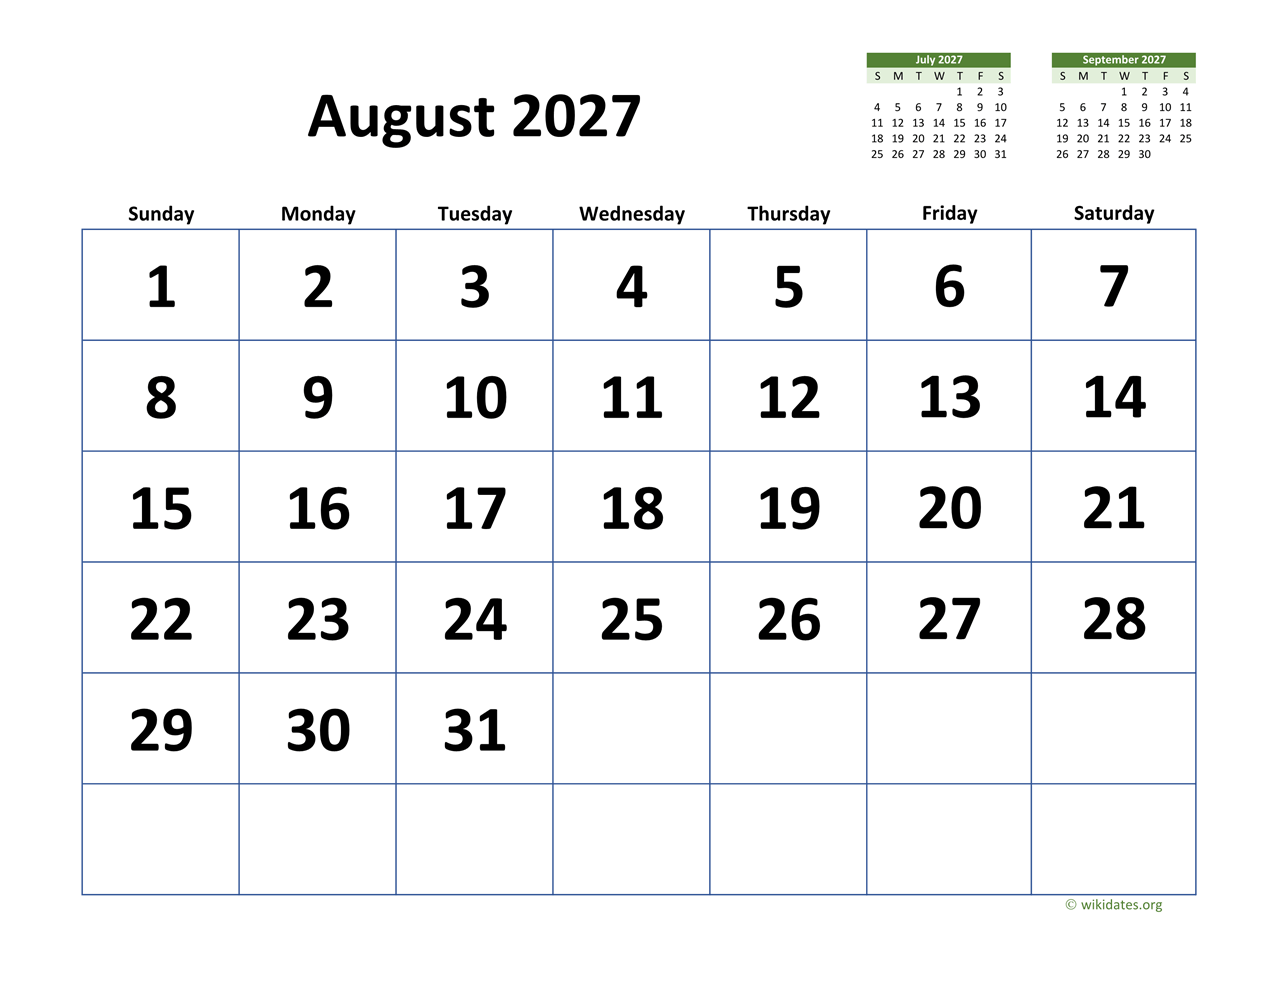 August 2027 Calendar with Extralarge Dates